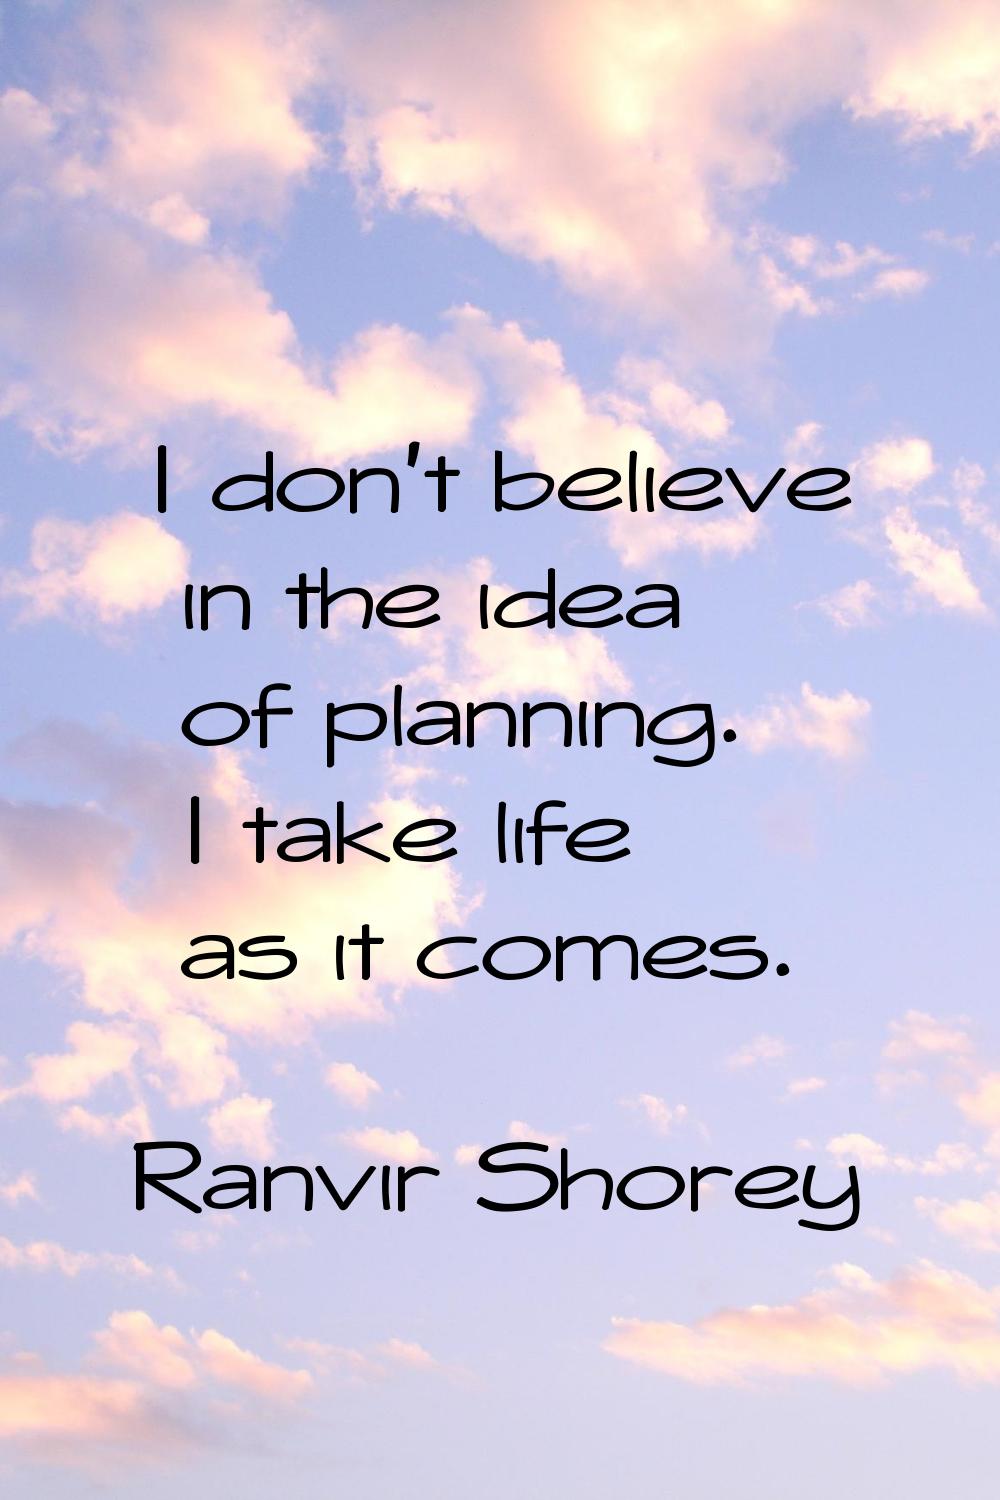 I don't believe in the idea of planning. I take life as it comes.